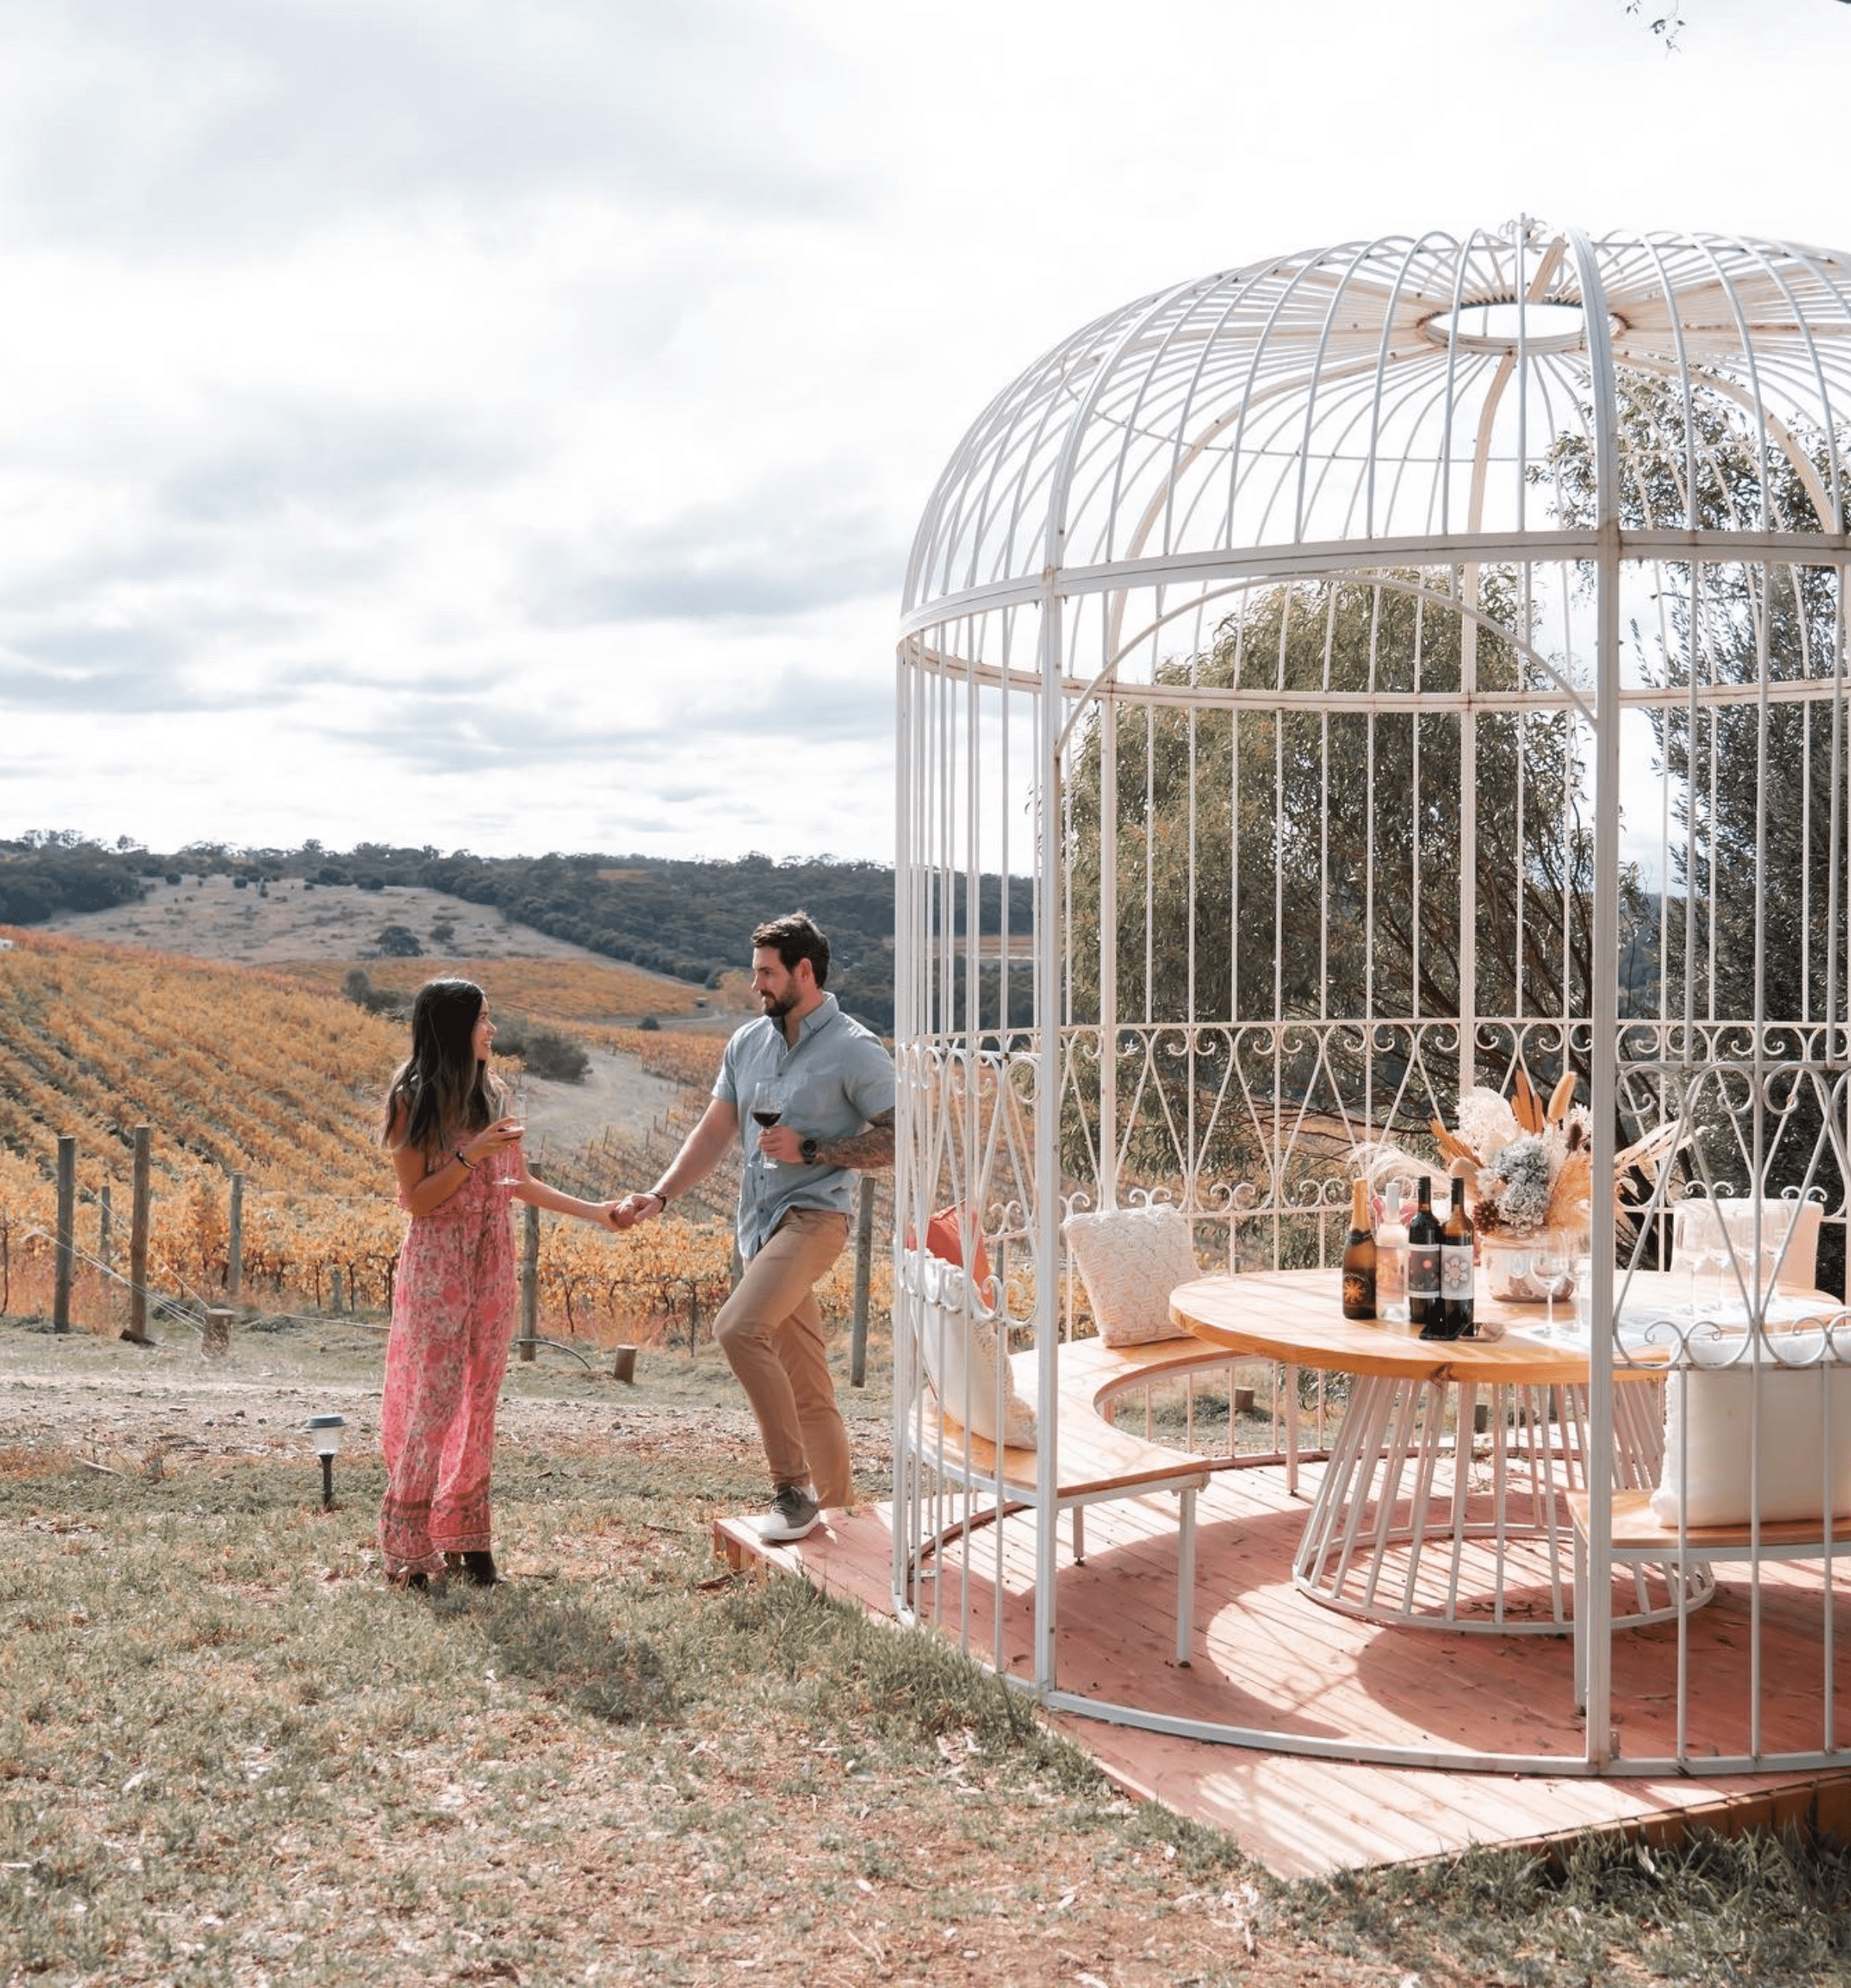 man & woman drinking wine in front of birdcage seating area at winery with vineyard in the background